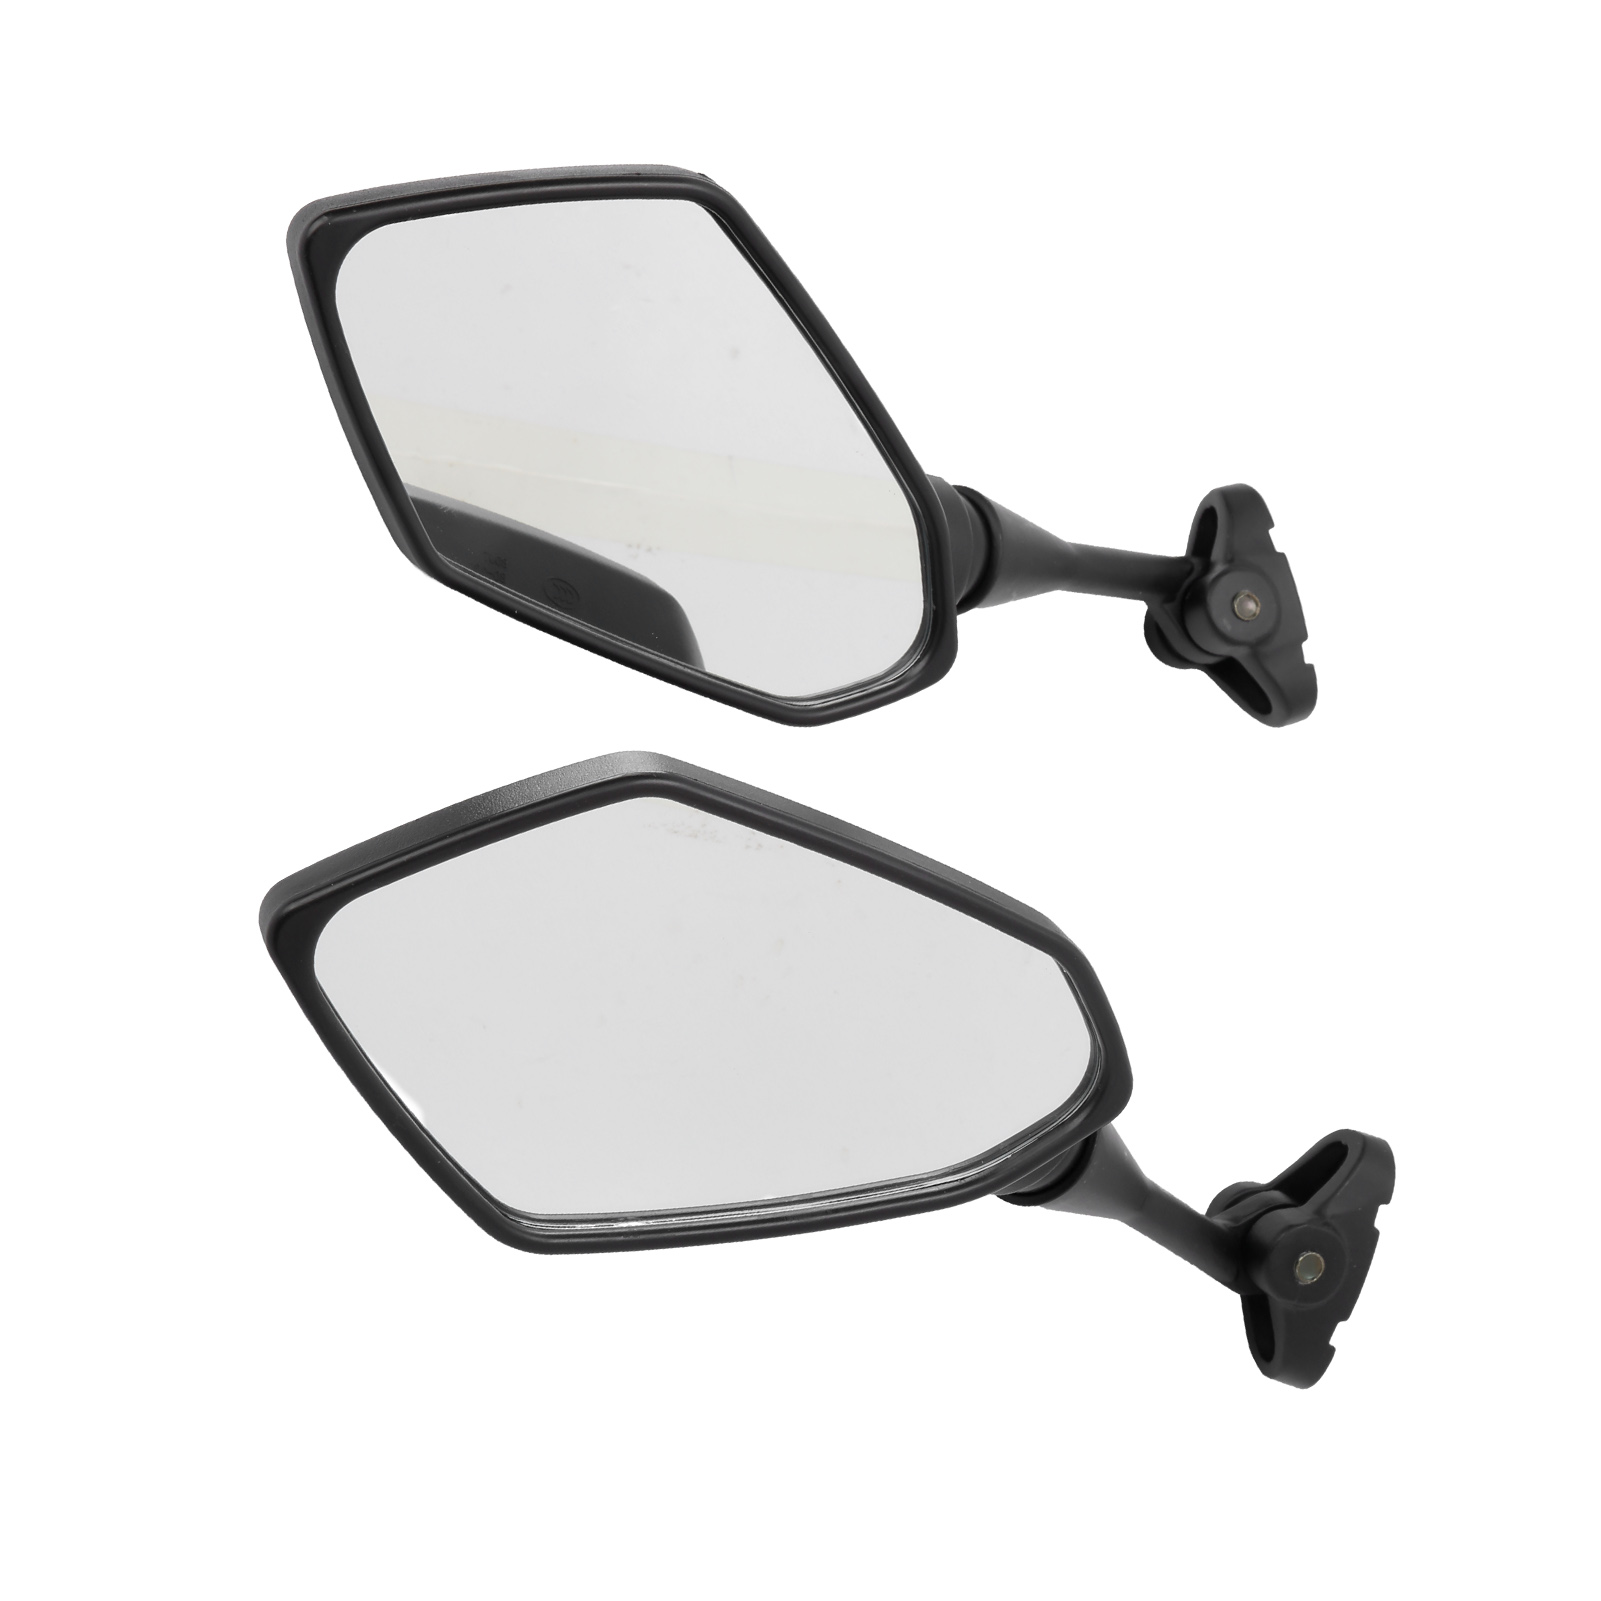 VGEBY Motorcycle Rear Mirror,Pair Motorcycle Rearview Mirrors Black  Visibility Replacement For CBR F4 Racing Walmart Canada